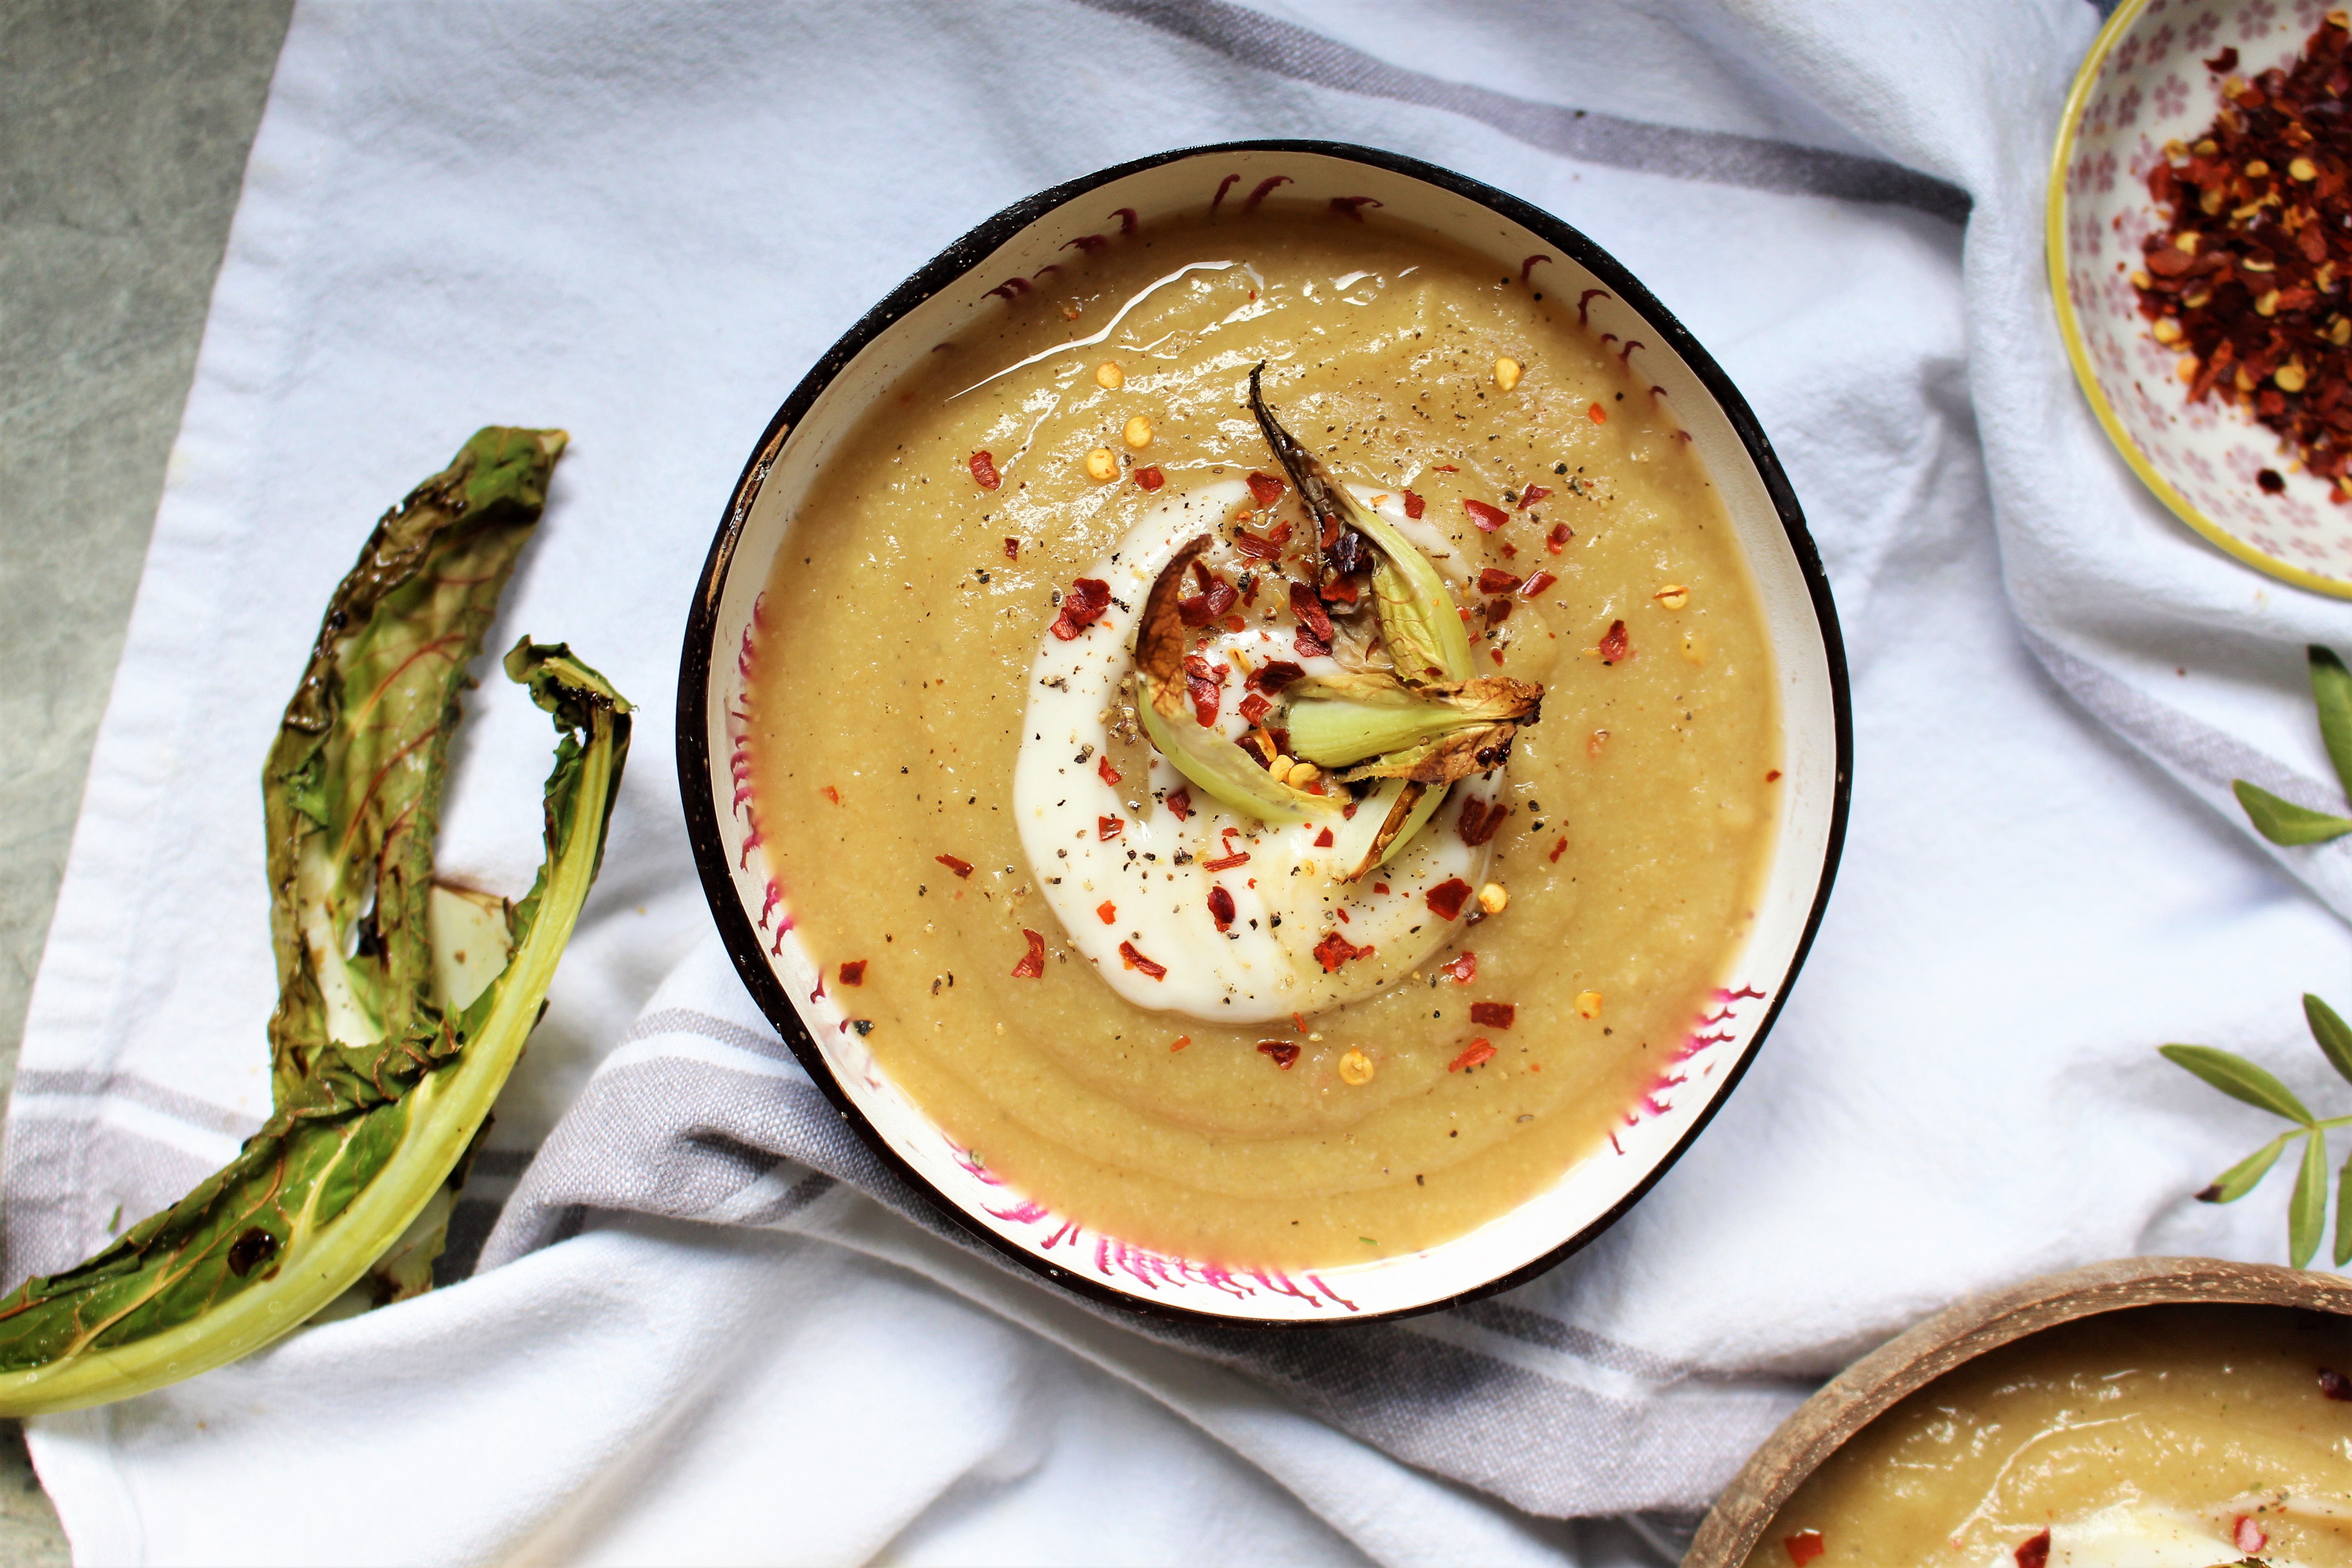 Spiced Parsnip and Cauliflower Soup